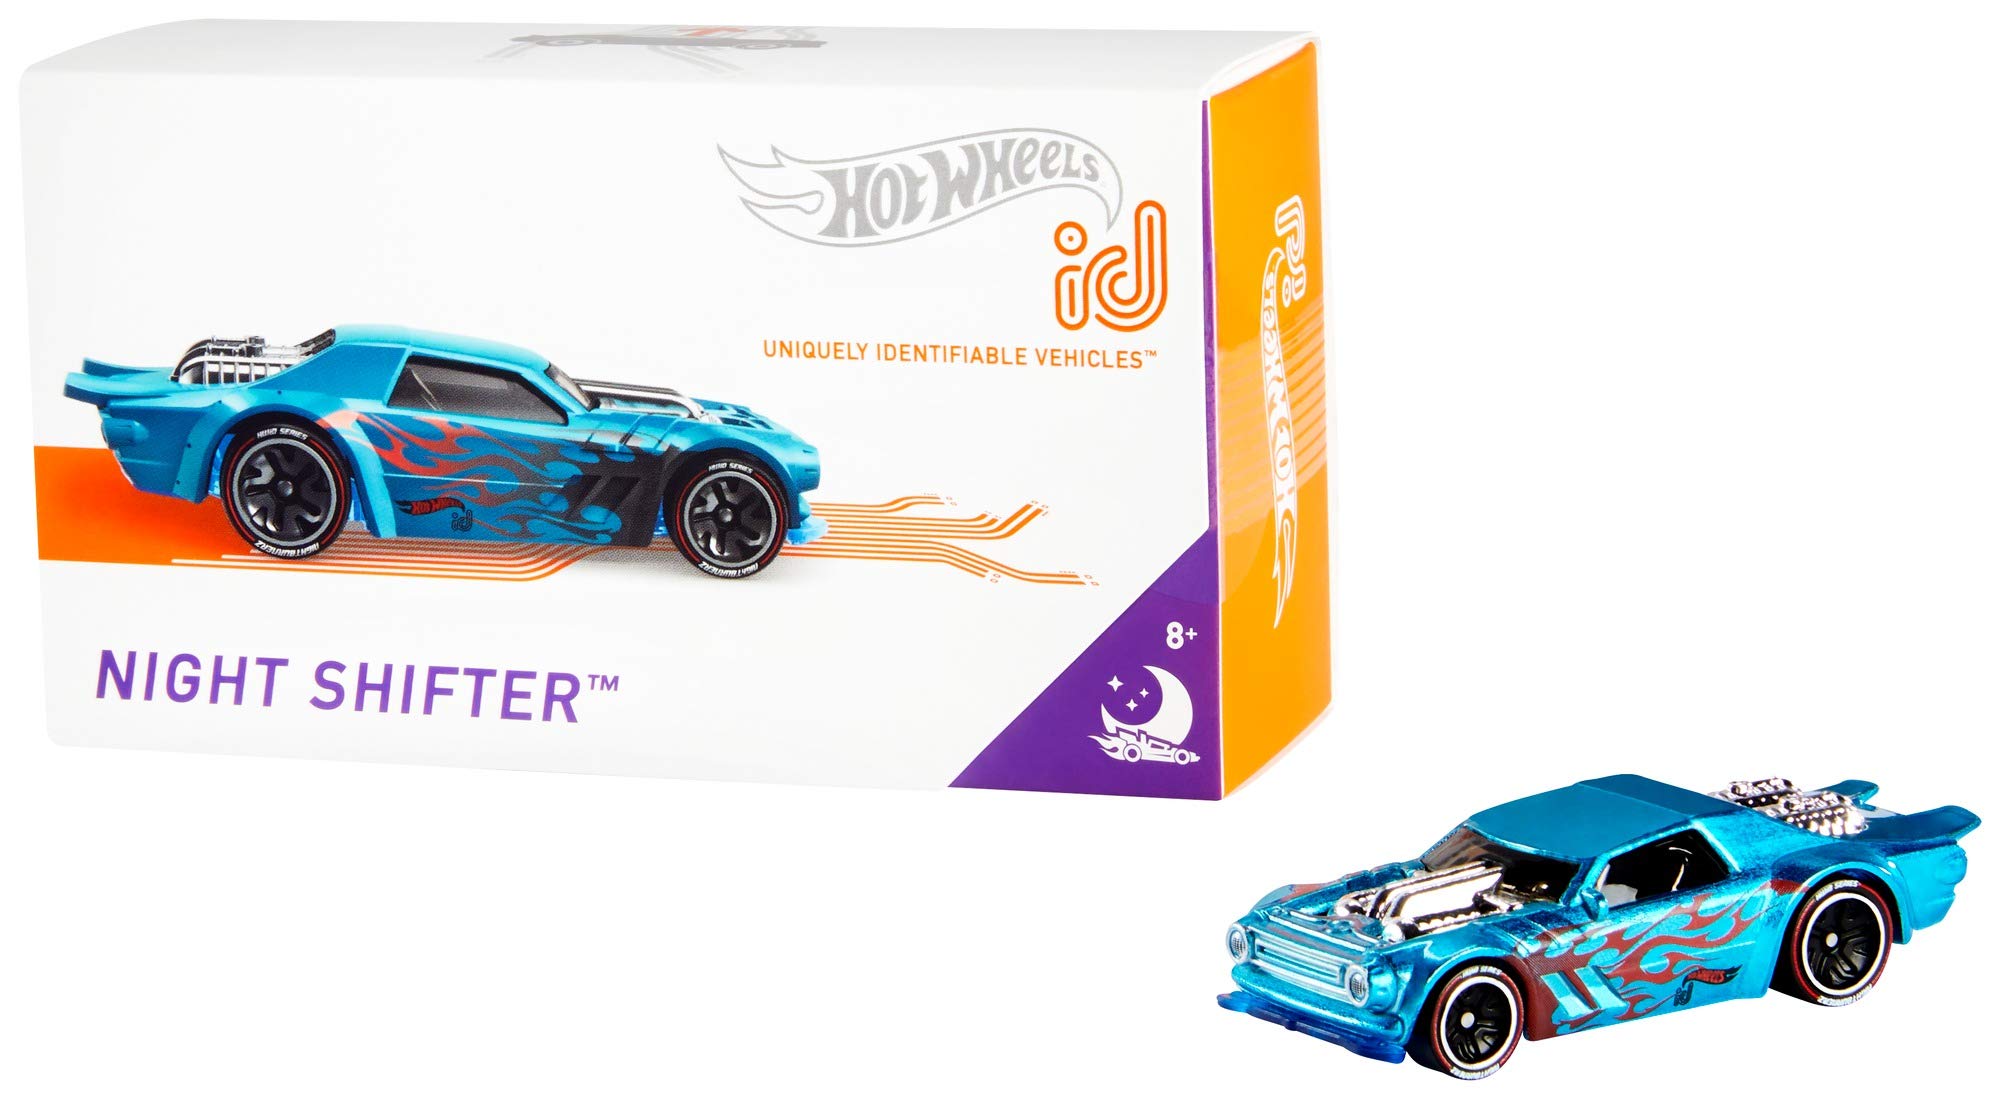 Hot Wheels id Vehicle Night Shifter with Embedded NFC Chip, Uniquely Identifiable, 1:64 Scale, for Kids Ages 8 Years and Older